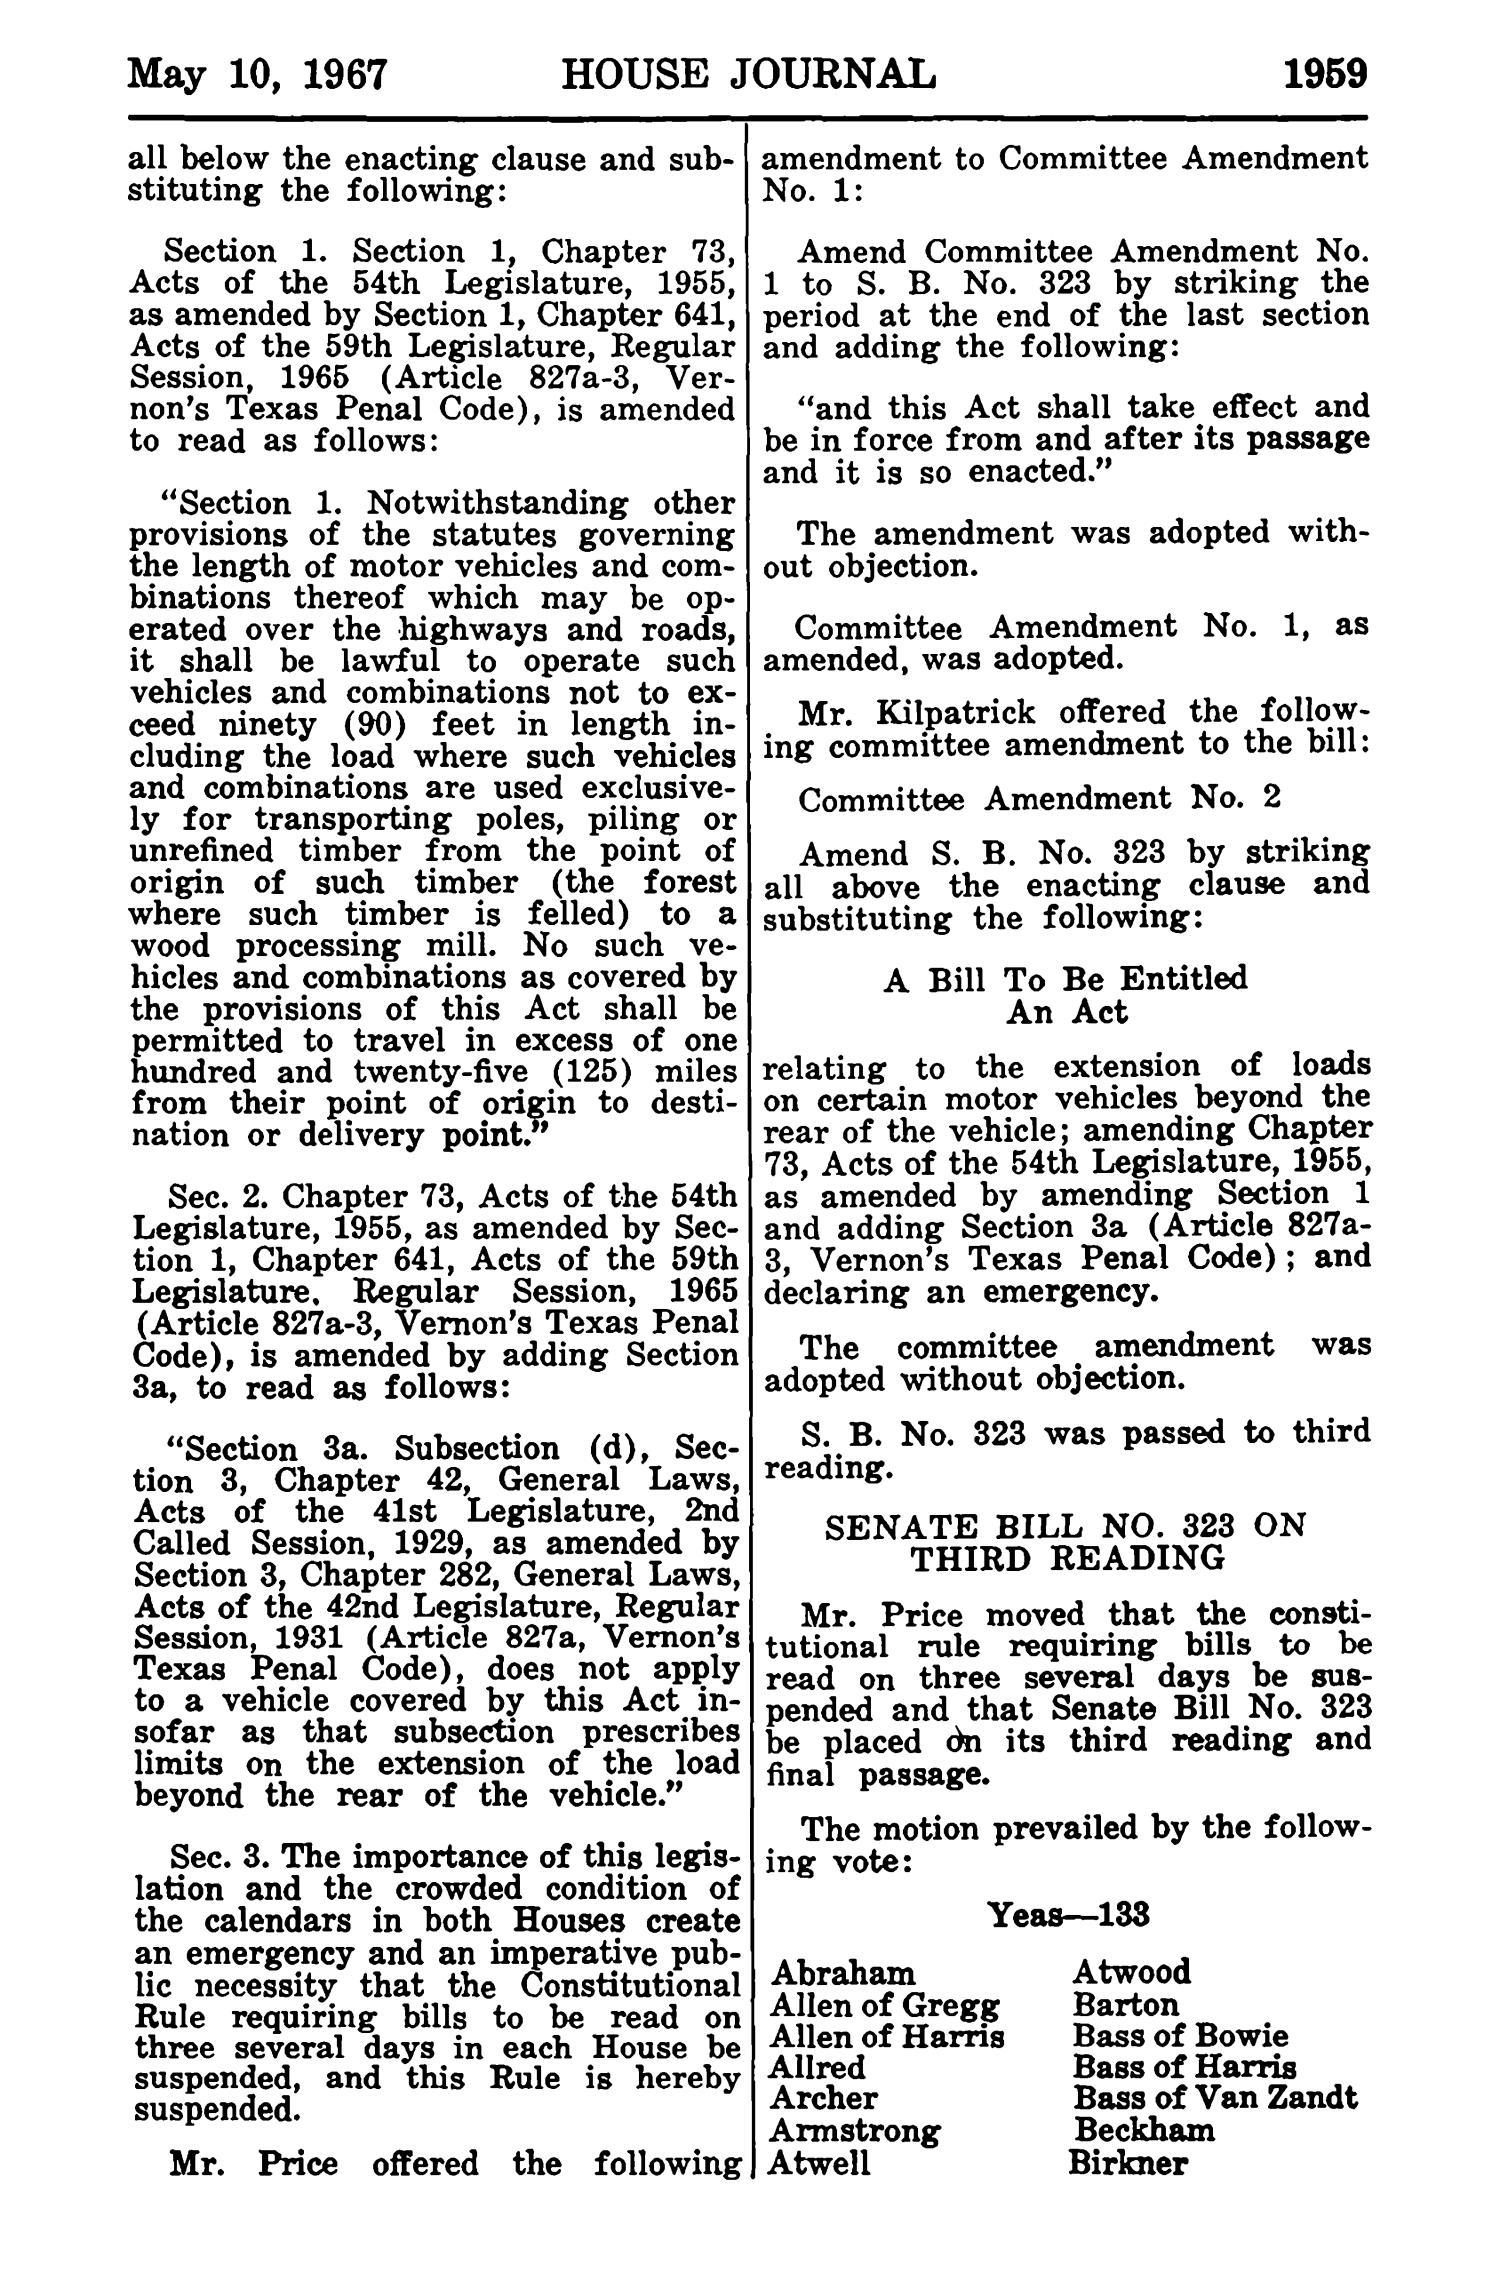 Journal of the House of Representatives of the Sixtieth Legislature of the State of Texas, Regular Session, Volume 2, and First Called Session
                                                
                                                    1959
                                                